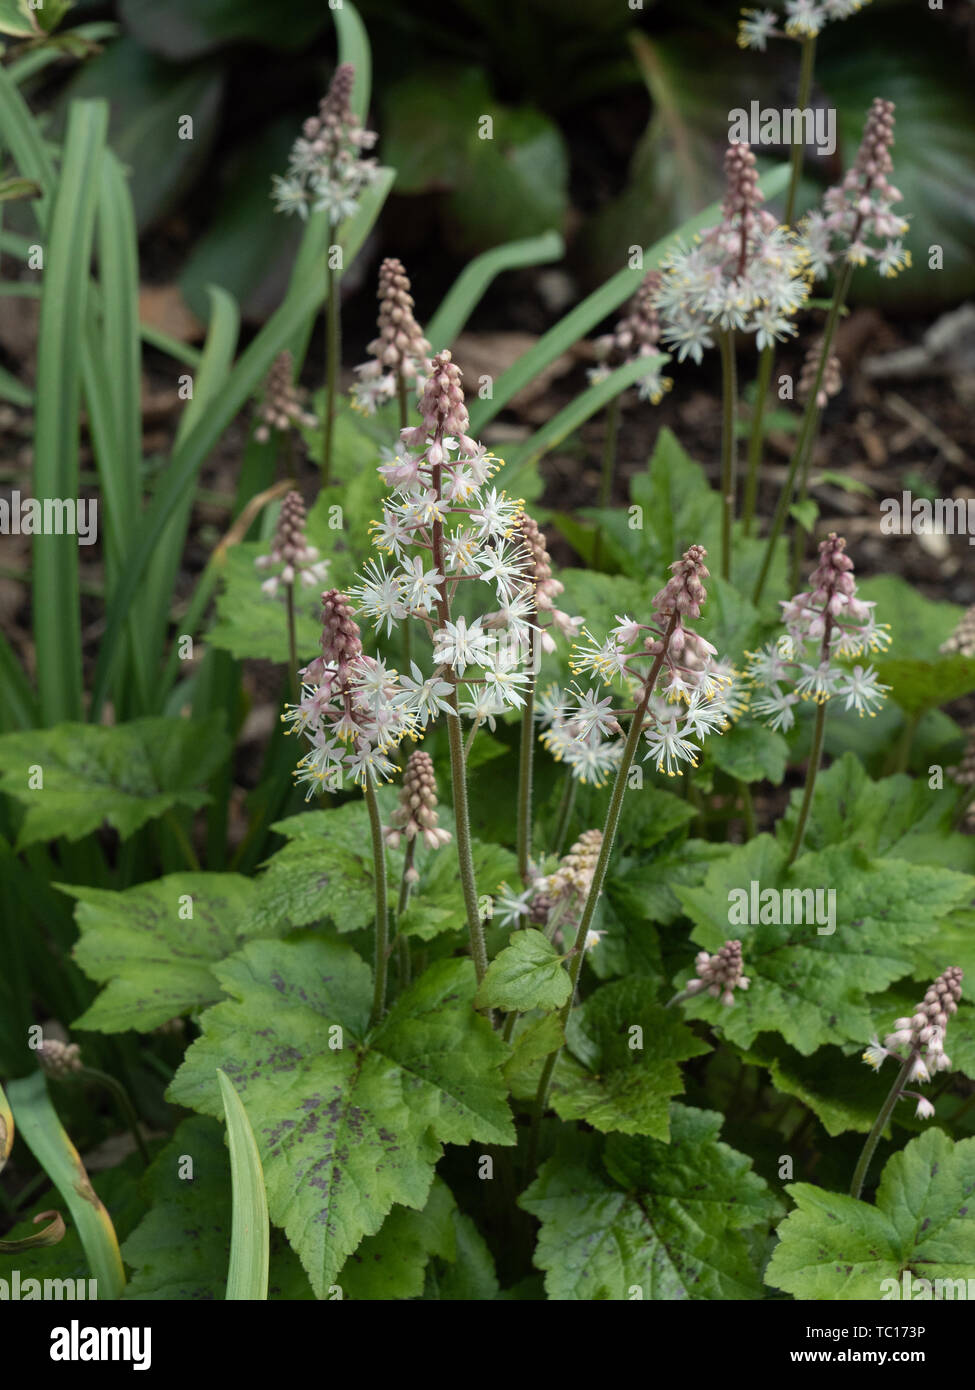 Tiarella Inkblot growing on the edge of a shaded woodland bed Stock Photo